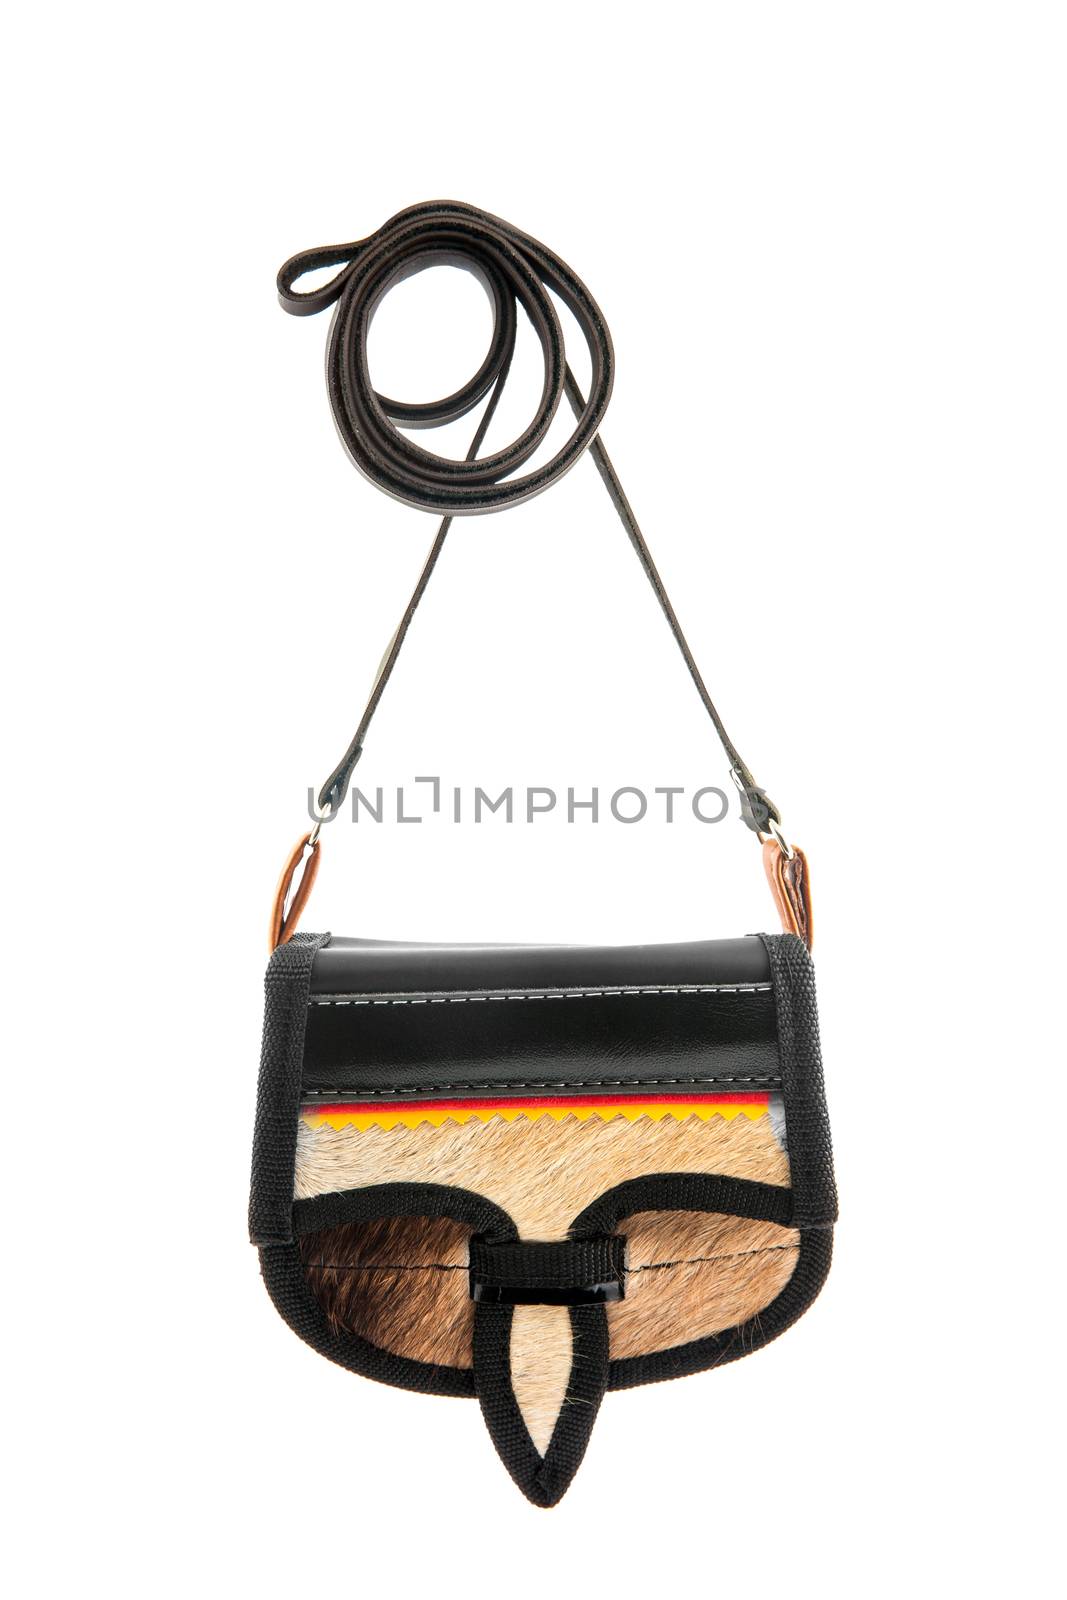 Colombian traditional leather satchel from the Antioquia Region called Carriel isolated on white background